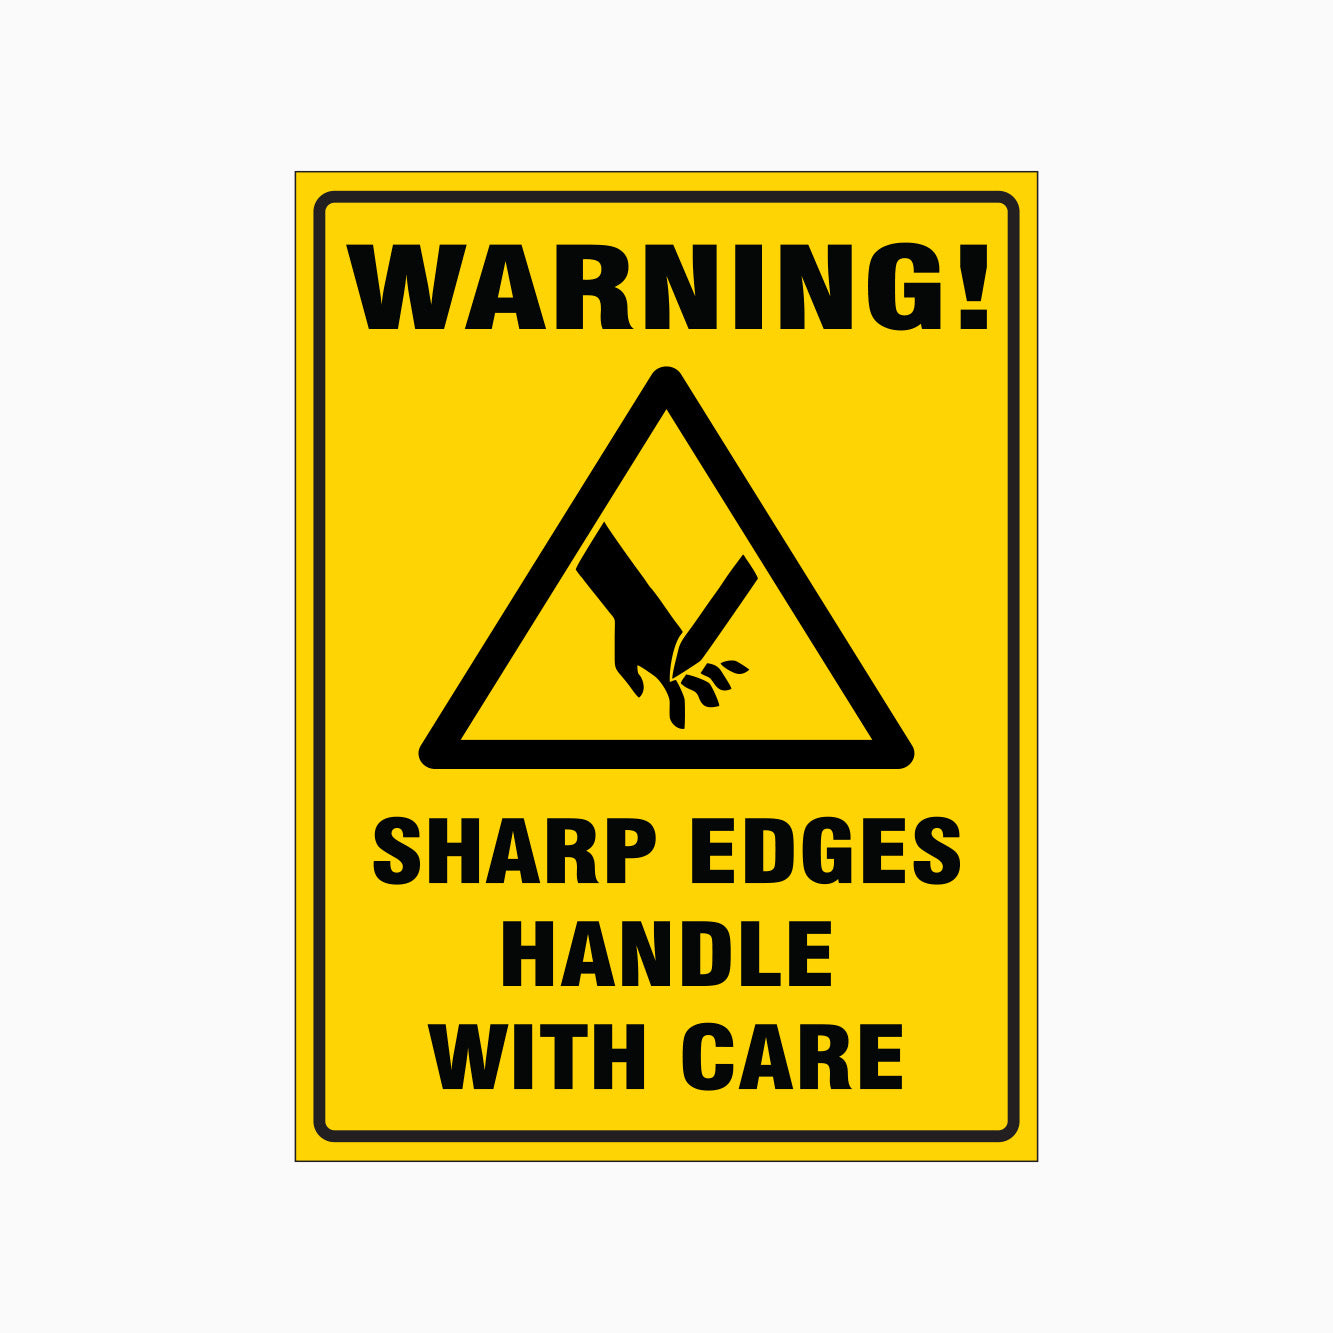 SHARP EDGES HANDLE WITH CARE SIGN - WARNING SIGN